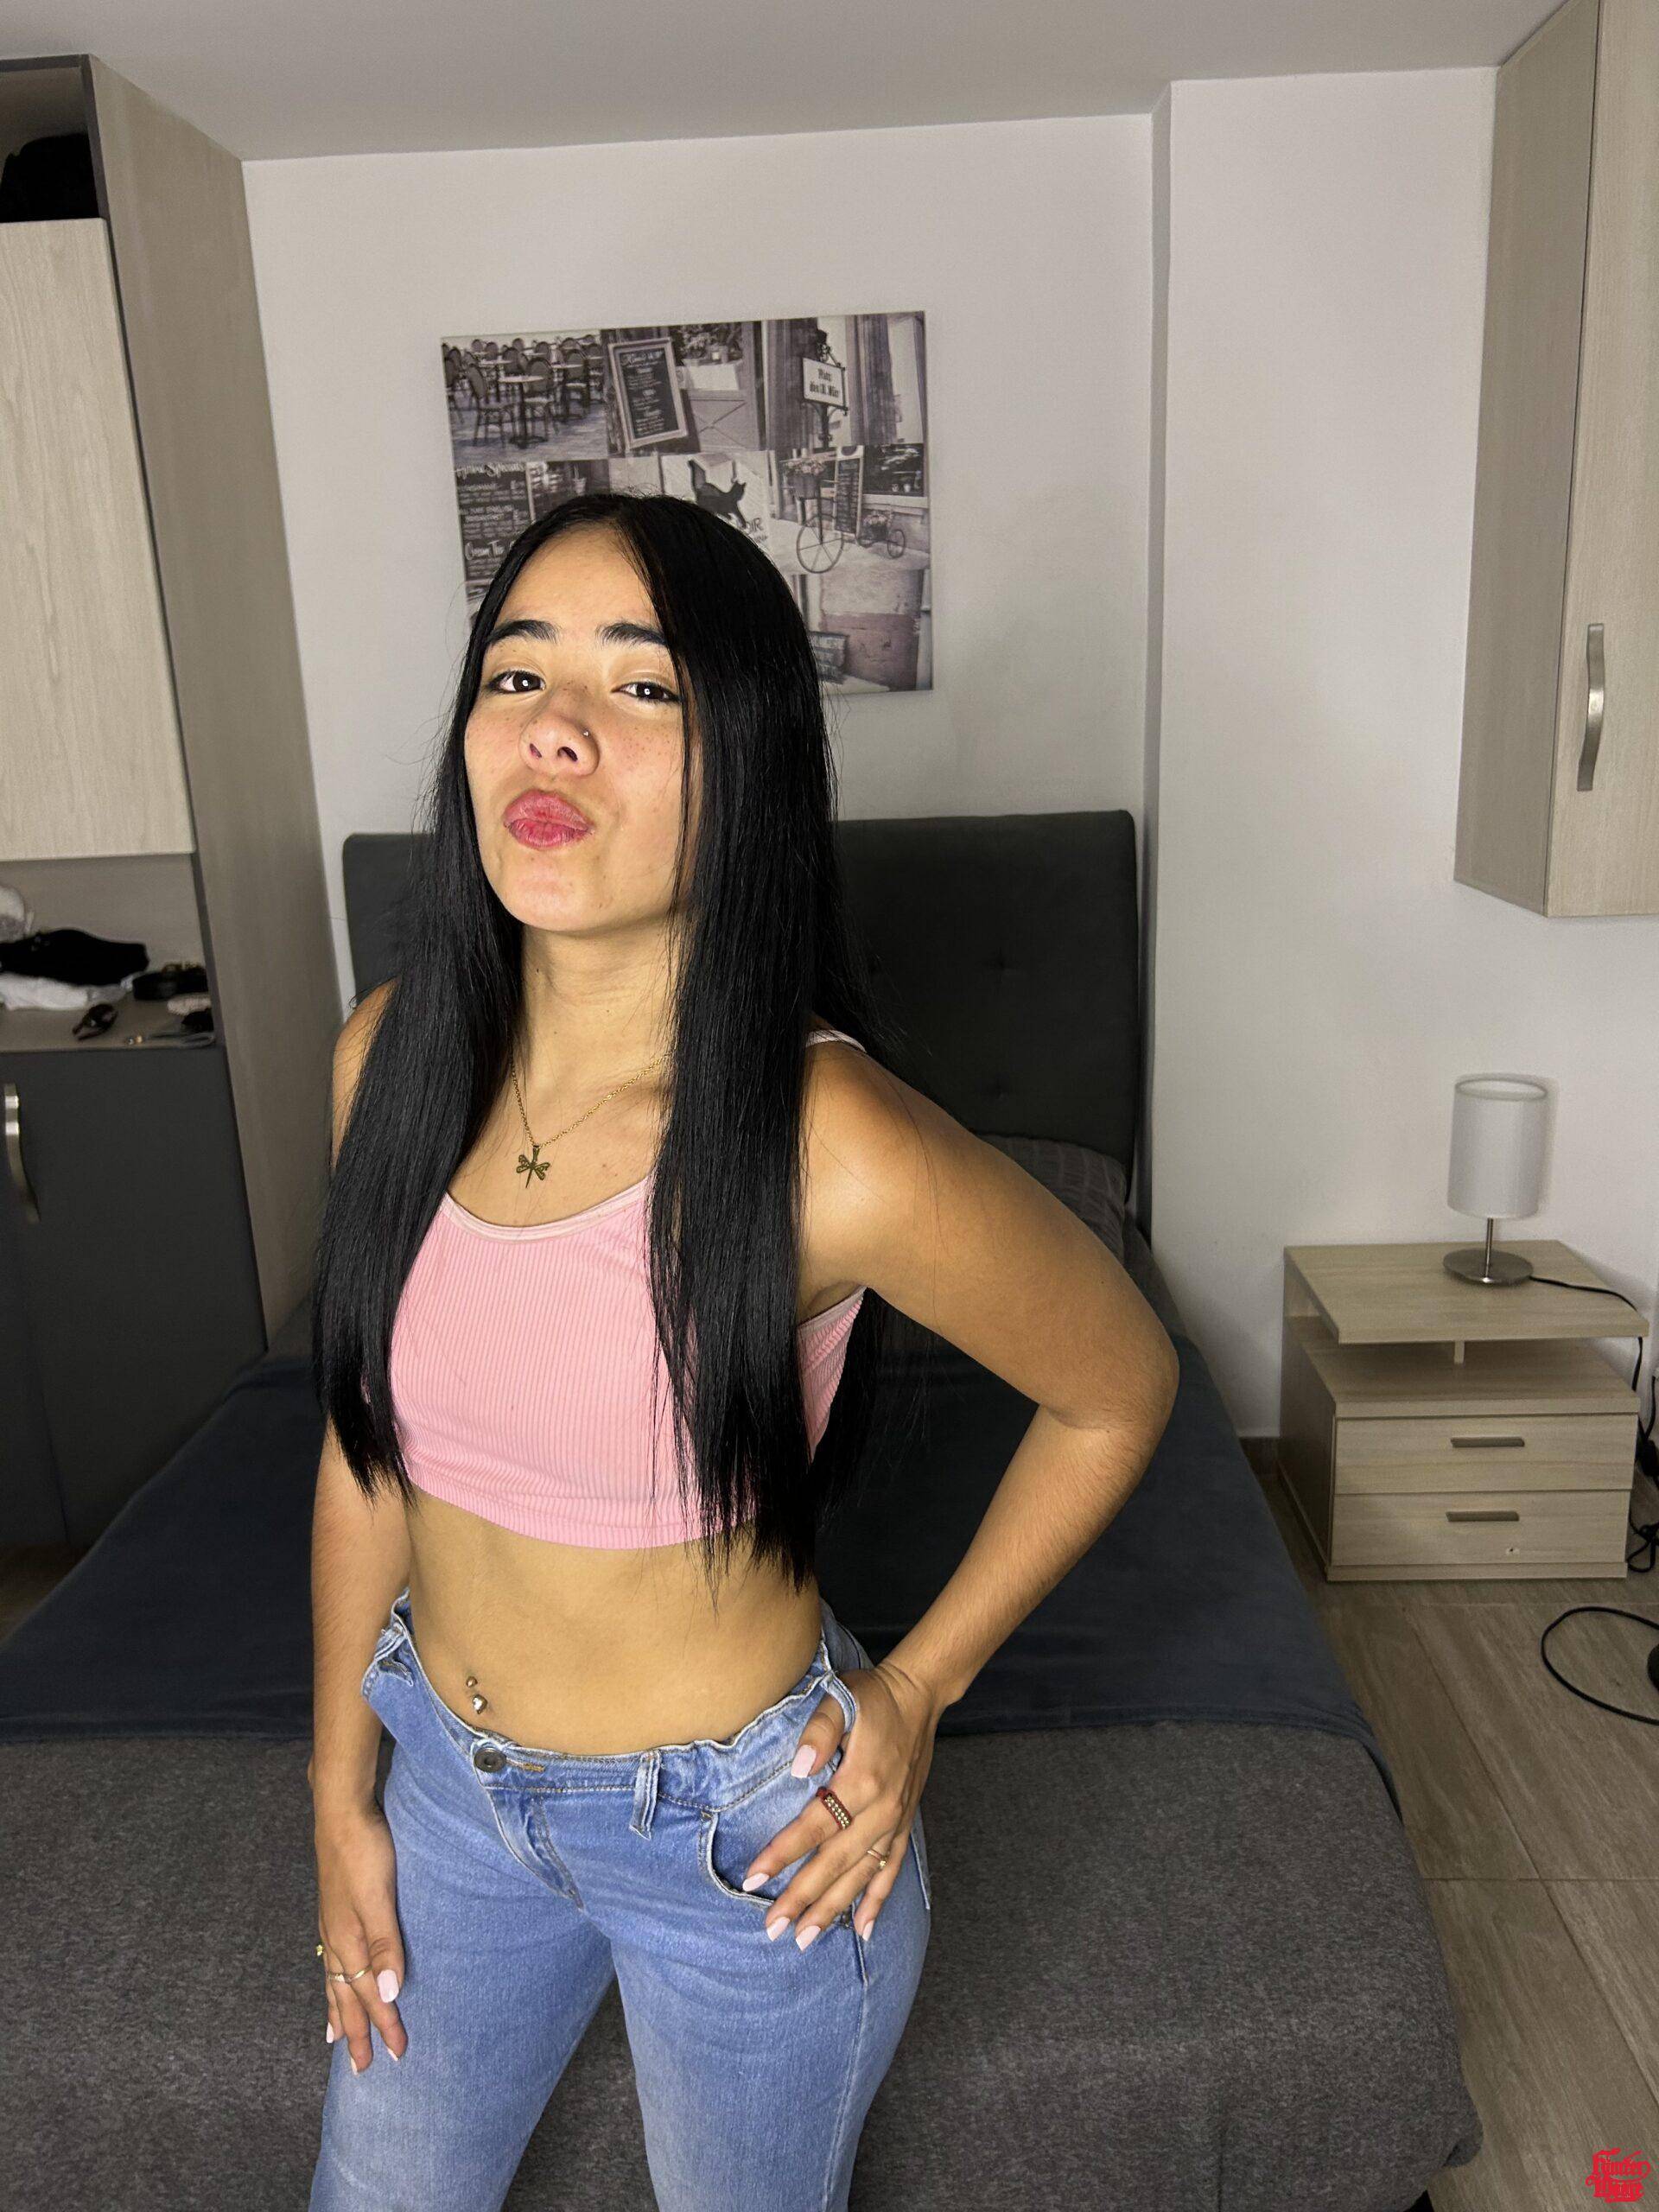 Blowjob Colombia - Your_naughtyangel - Video [Chaturbate] colombia best-blowjob-ever blowjob  blowjob-porn